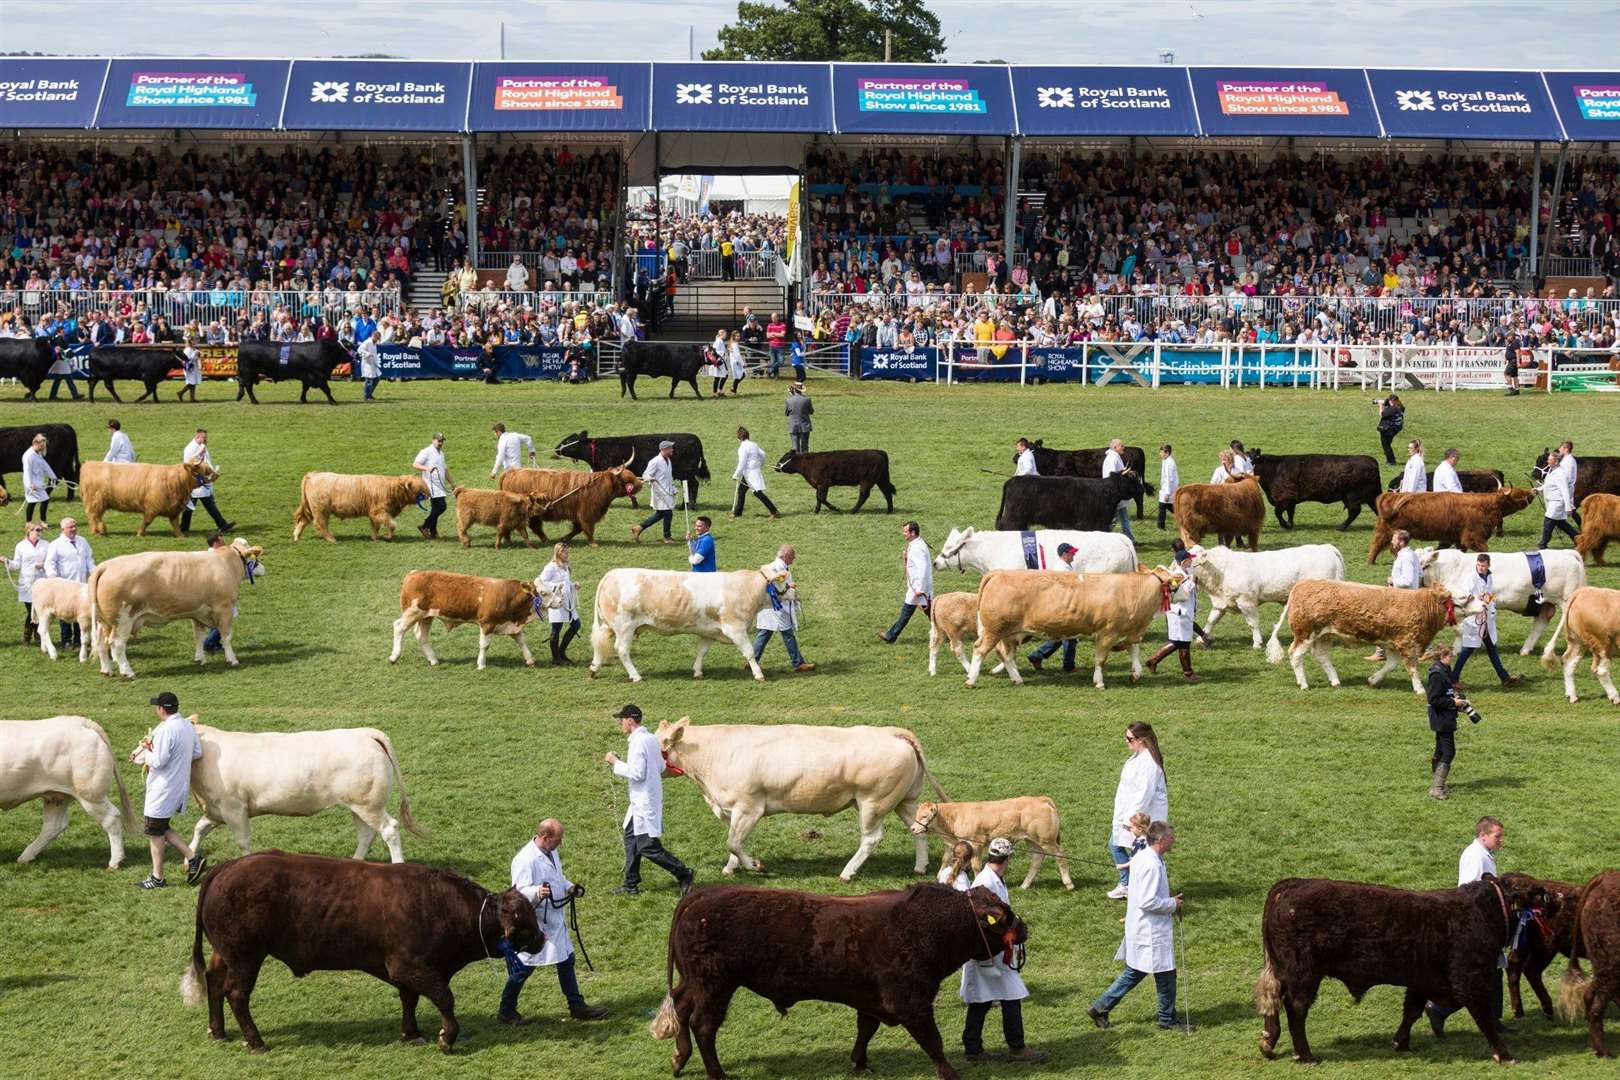 The Royal Highland show will be available to watch through RHS TV